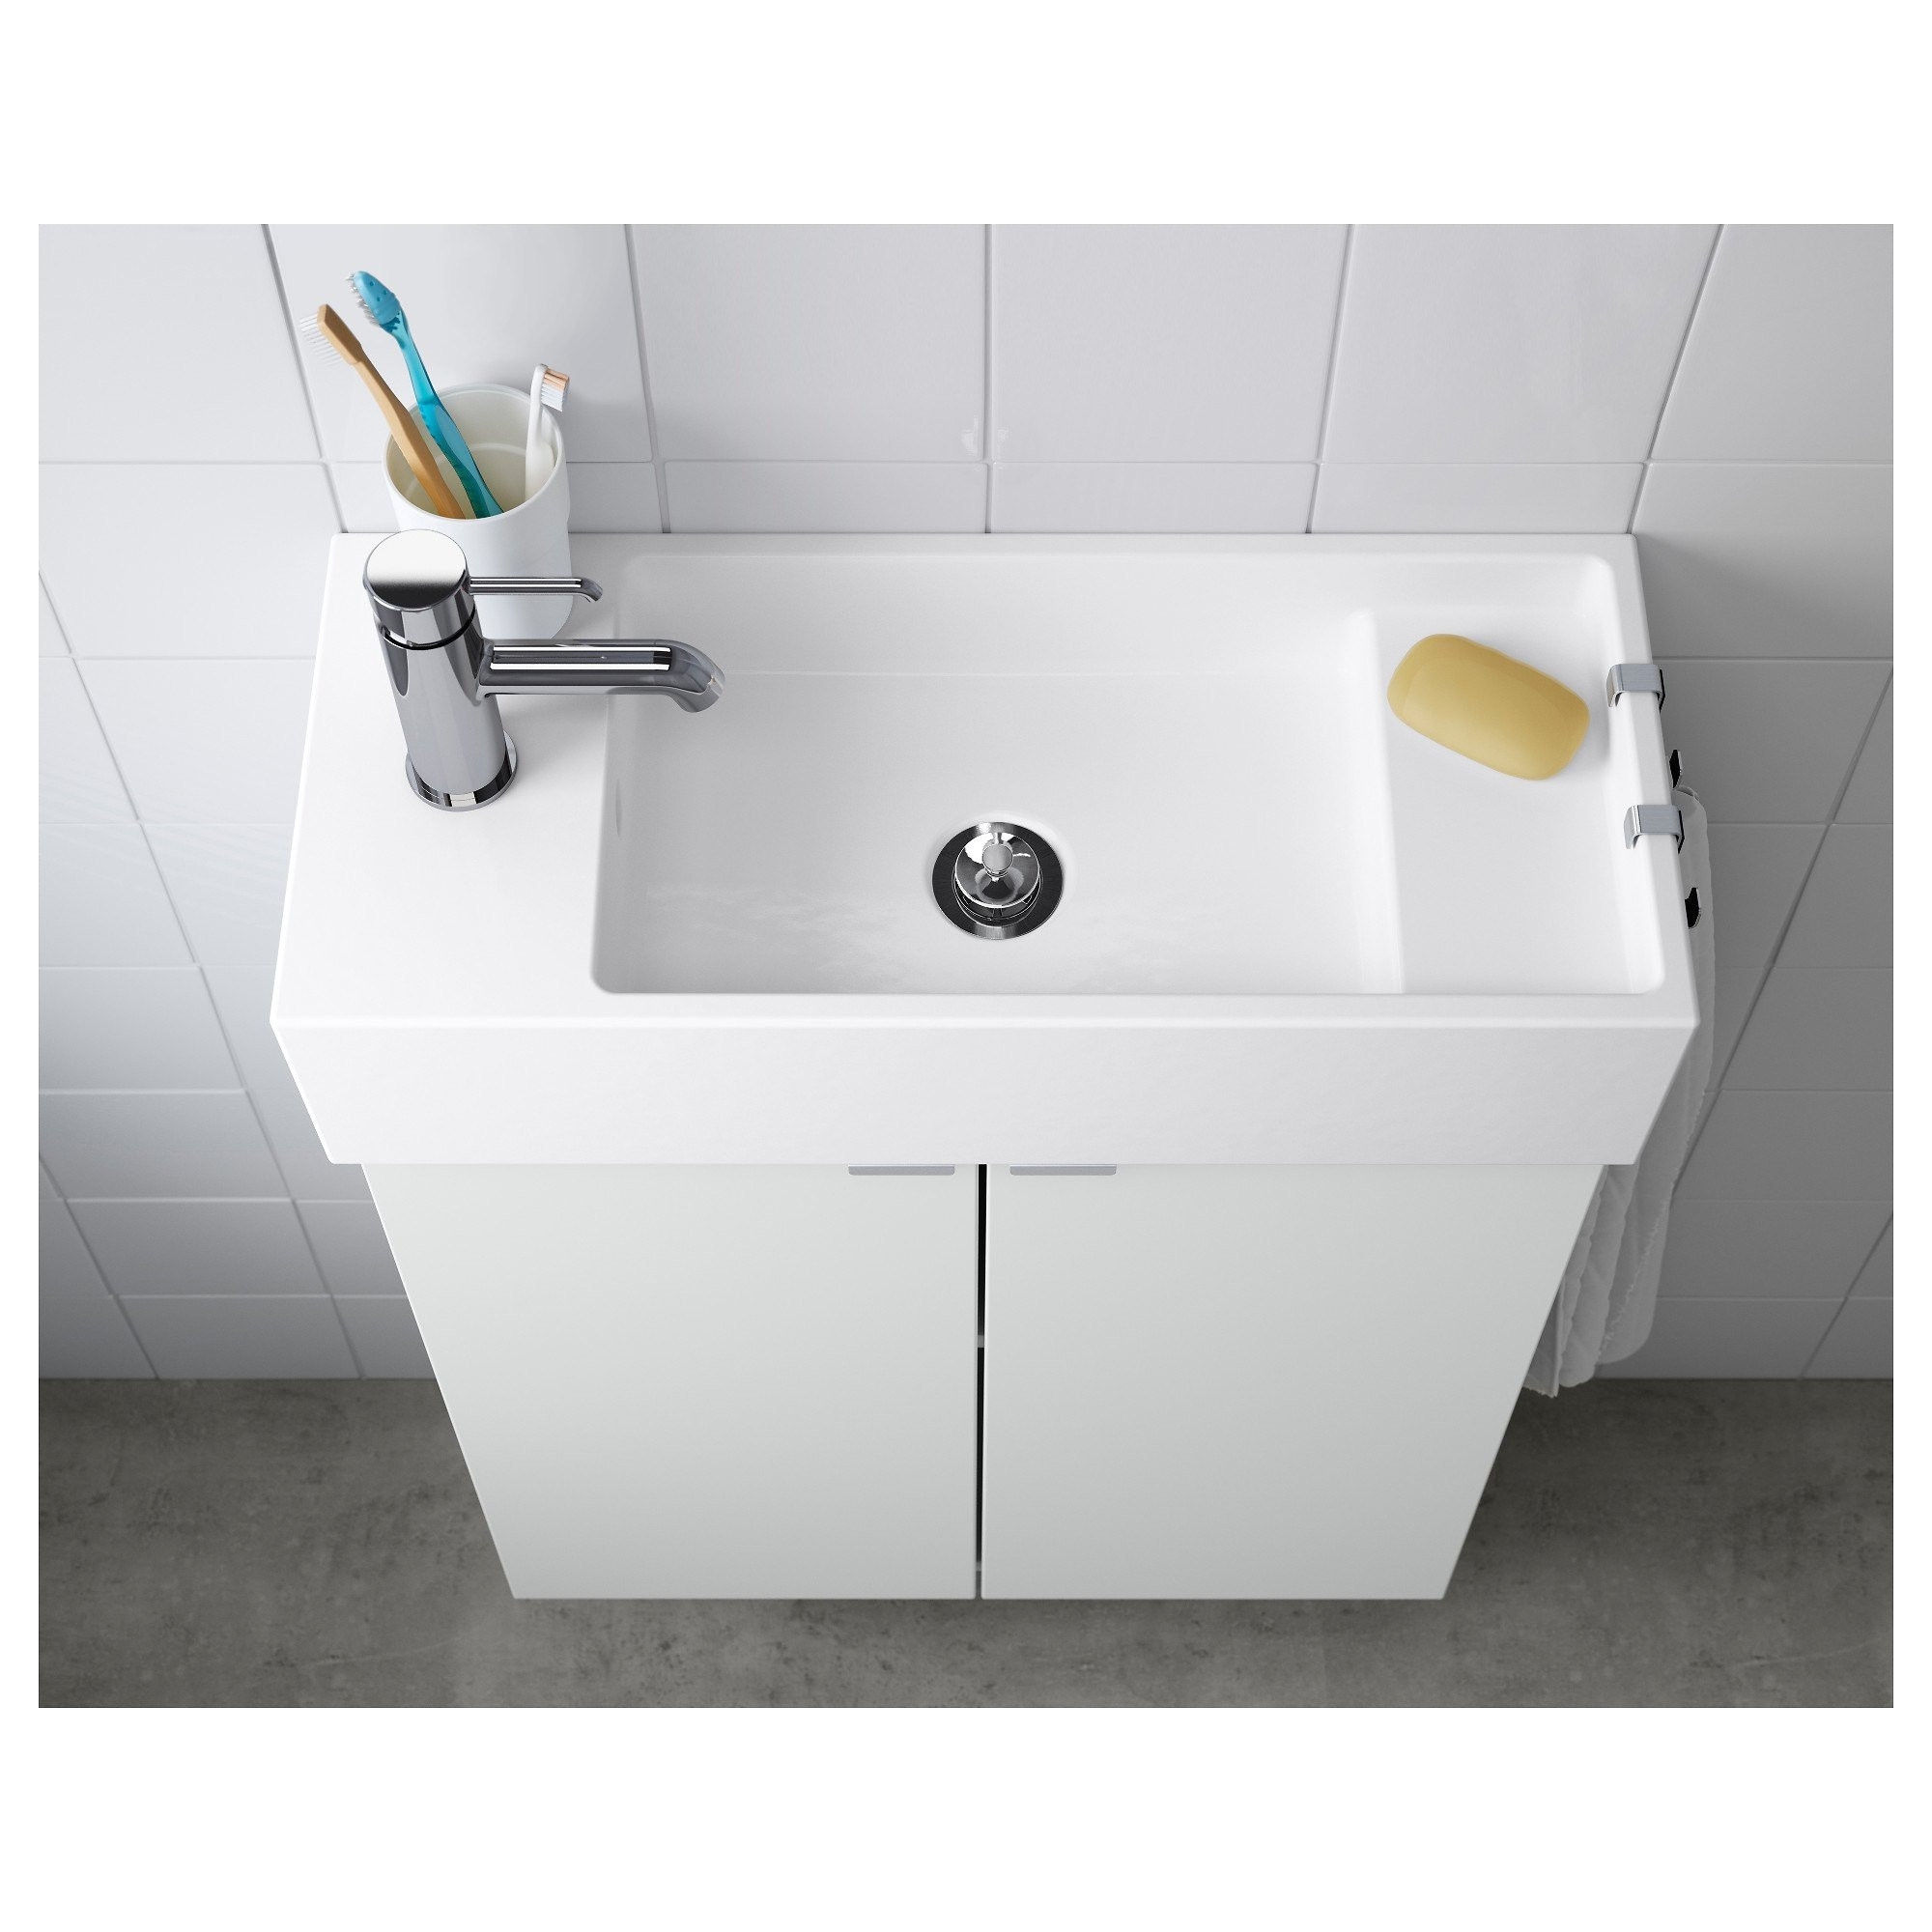 72 bathtub best bathroom sinks and cabinets ideas pe s5h sink ikea small i 0d graph